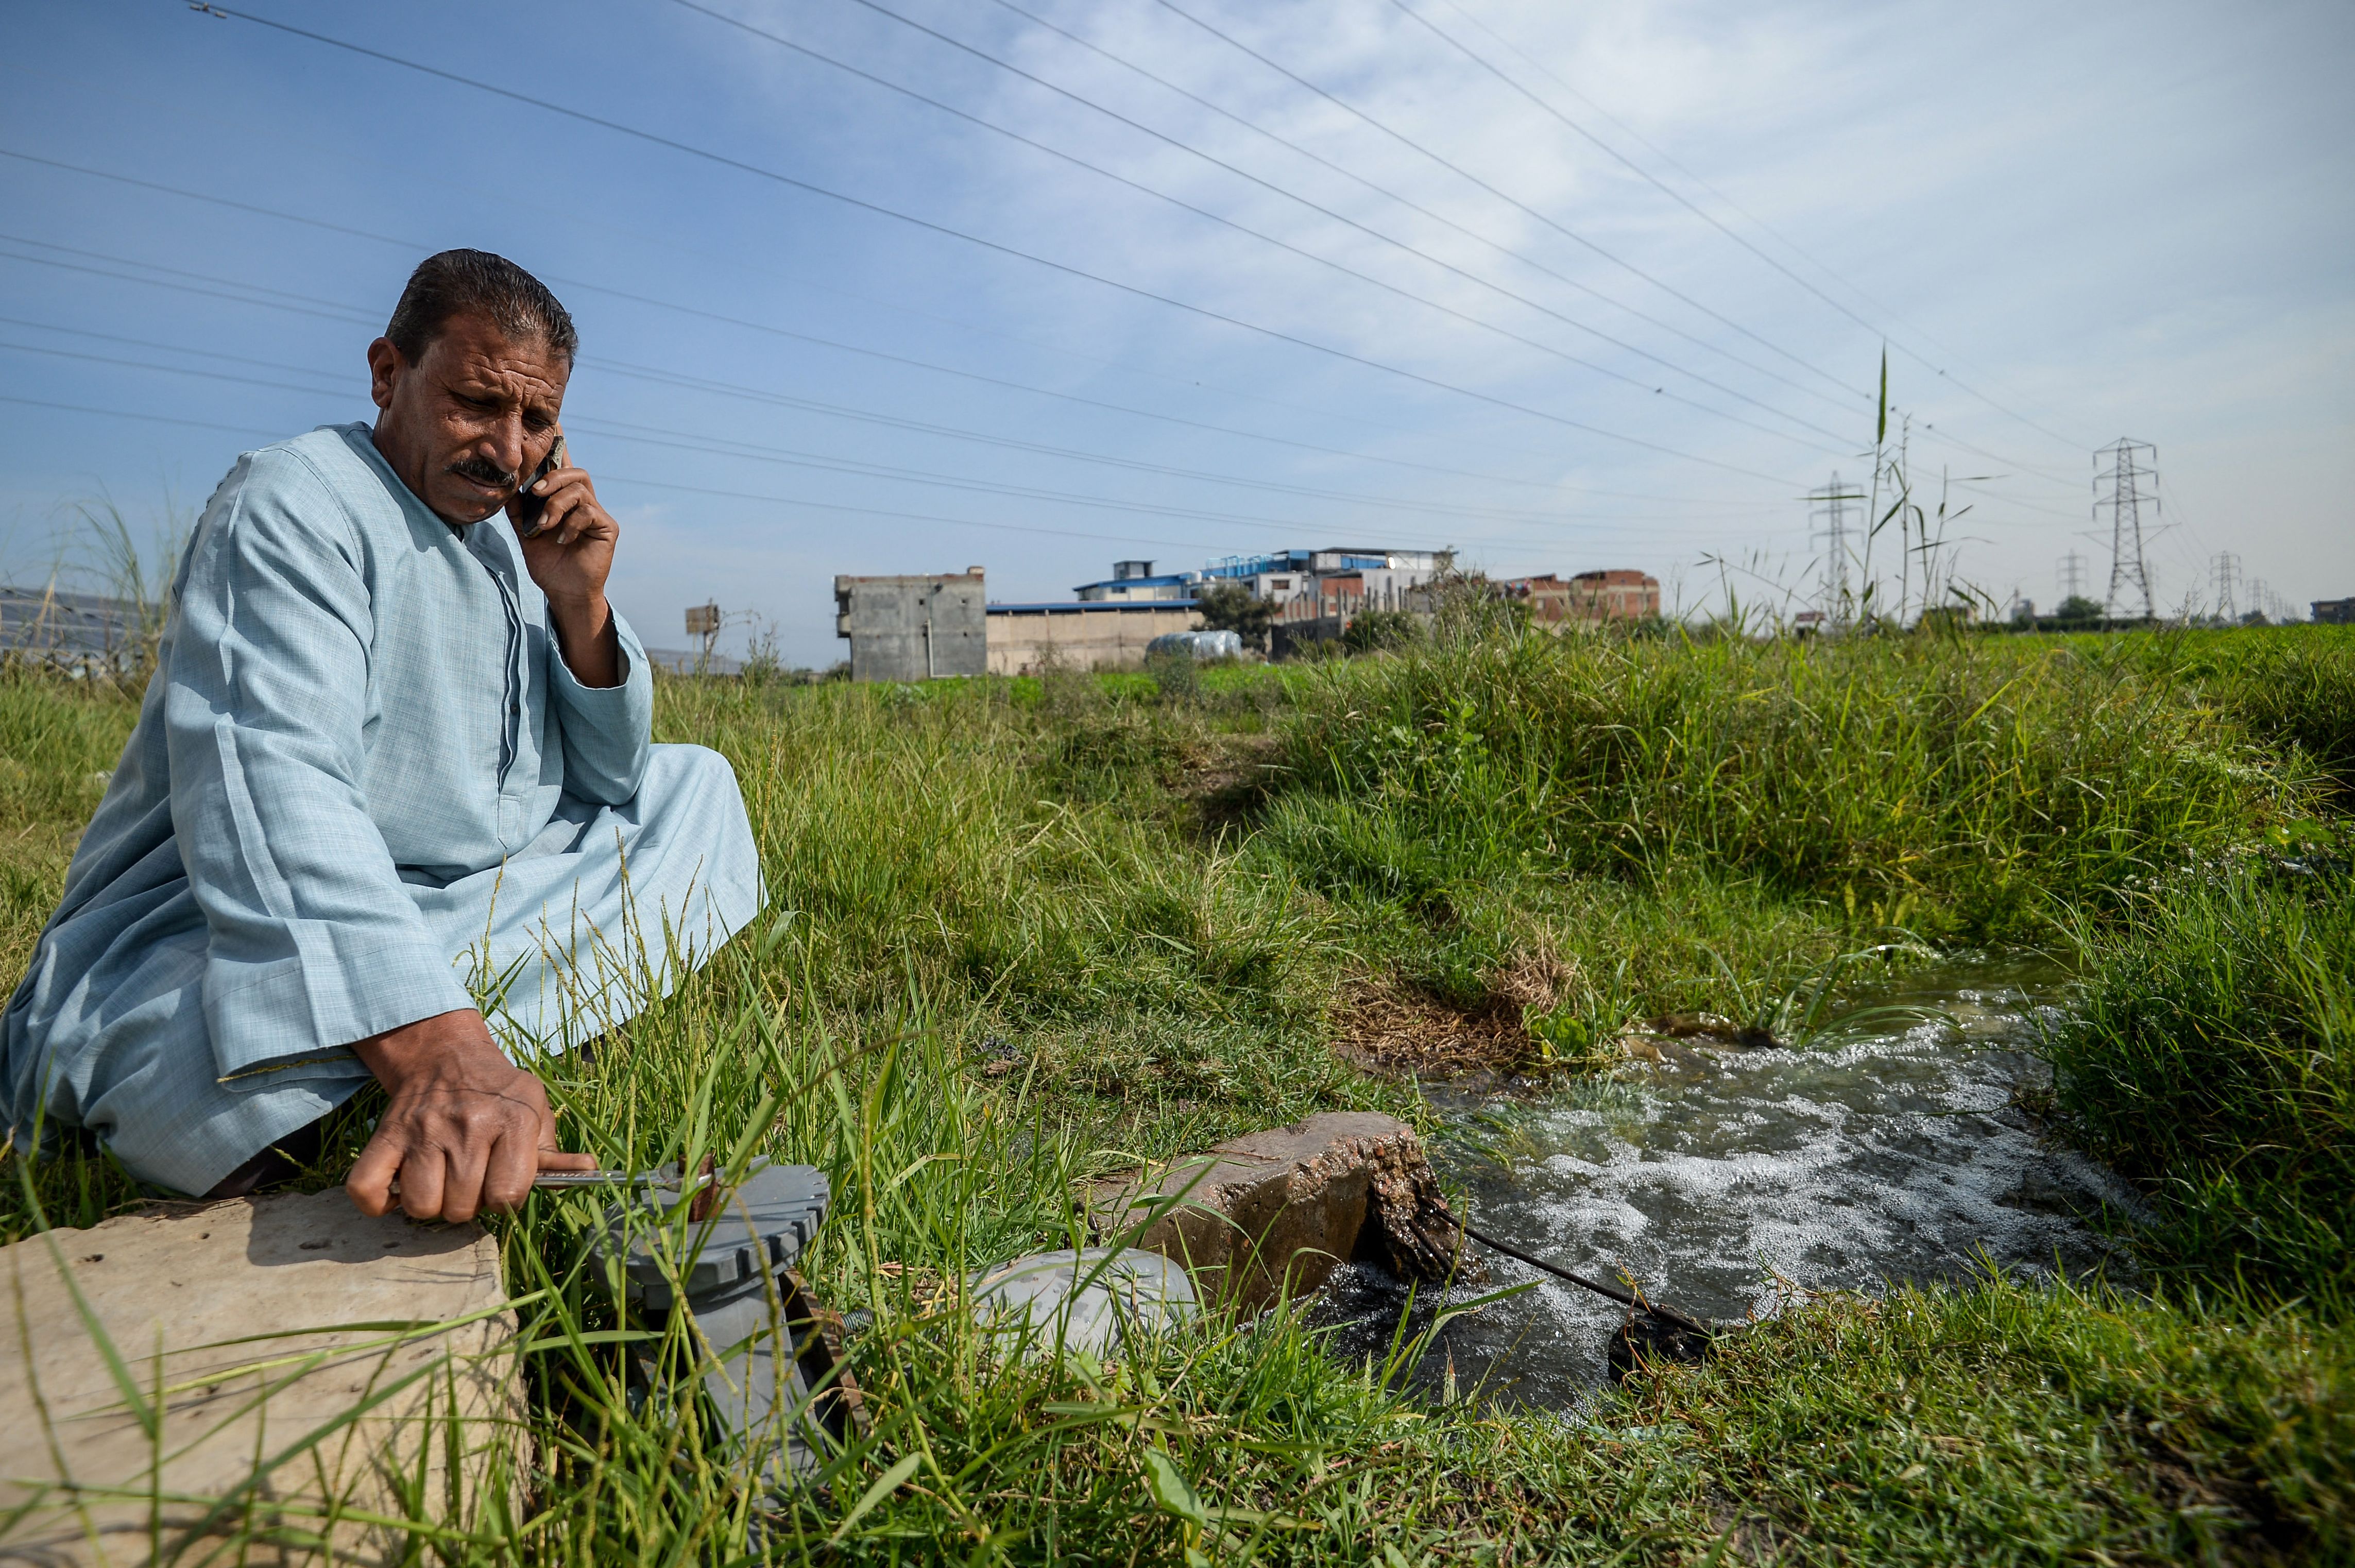 A farmer closes the water valve of a pump in Kafr al-Dawar village in northern Egypt’s Nile Delta